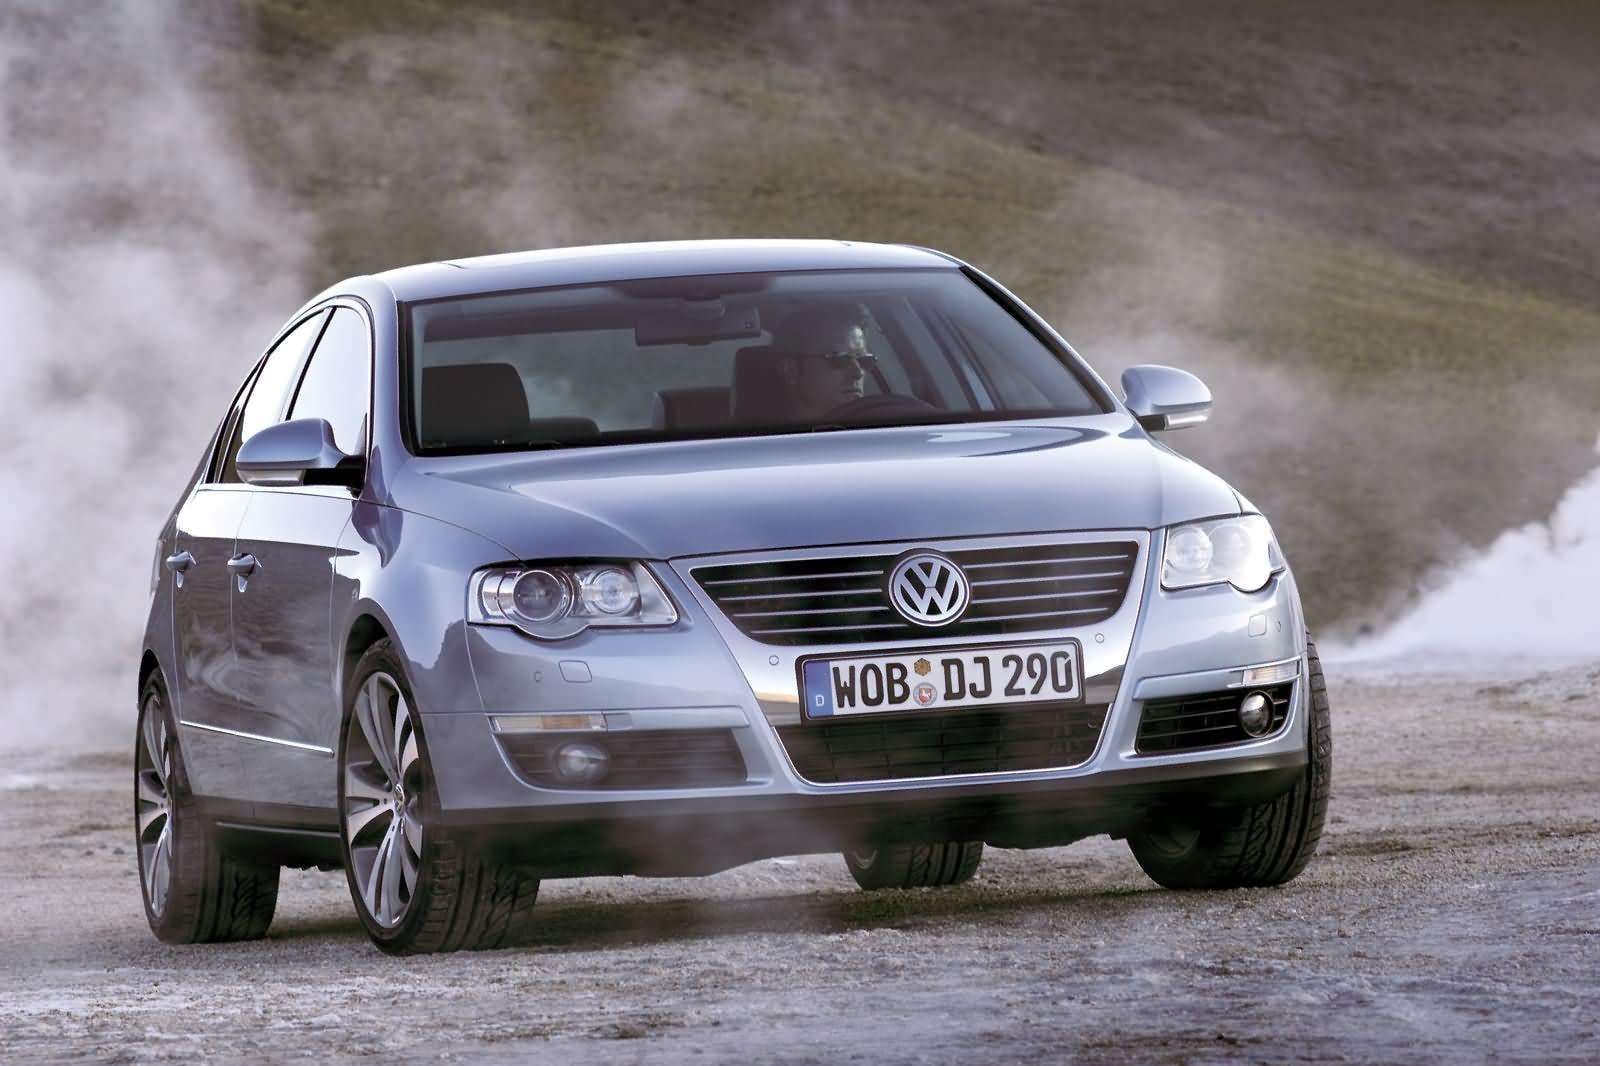 Volkswagen Passat B6 6th Generation - What To Check Before You Buy